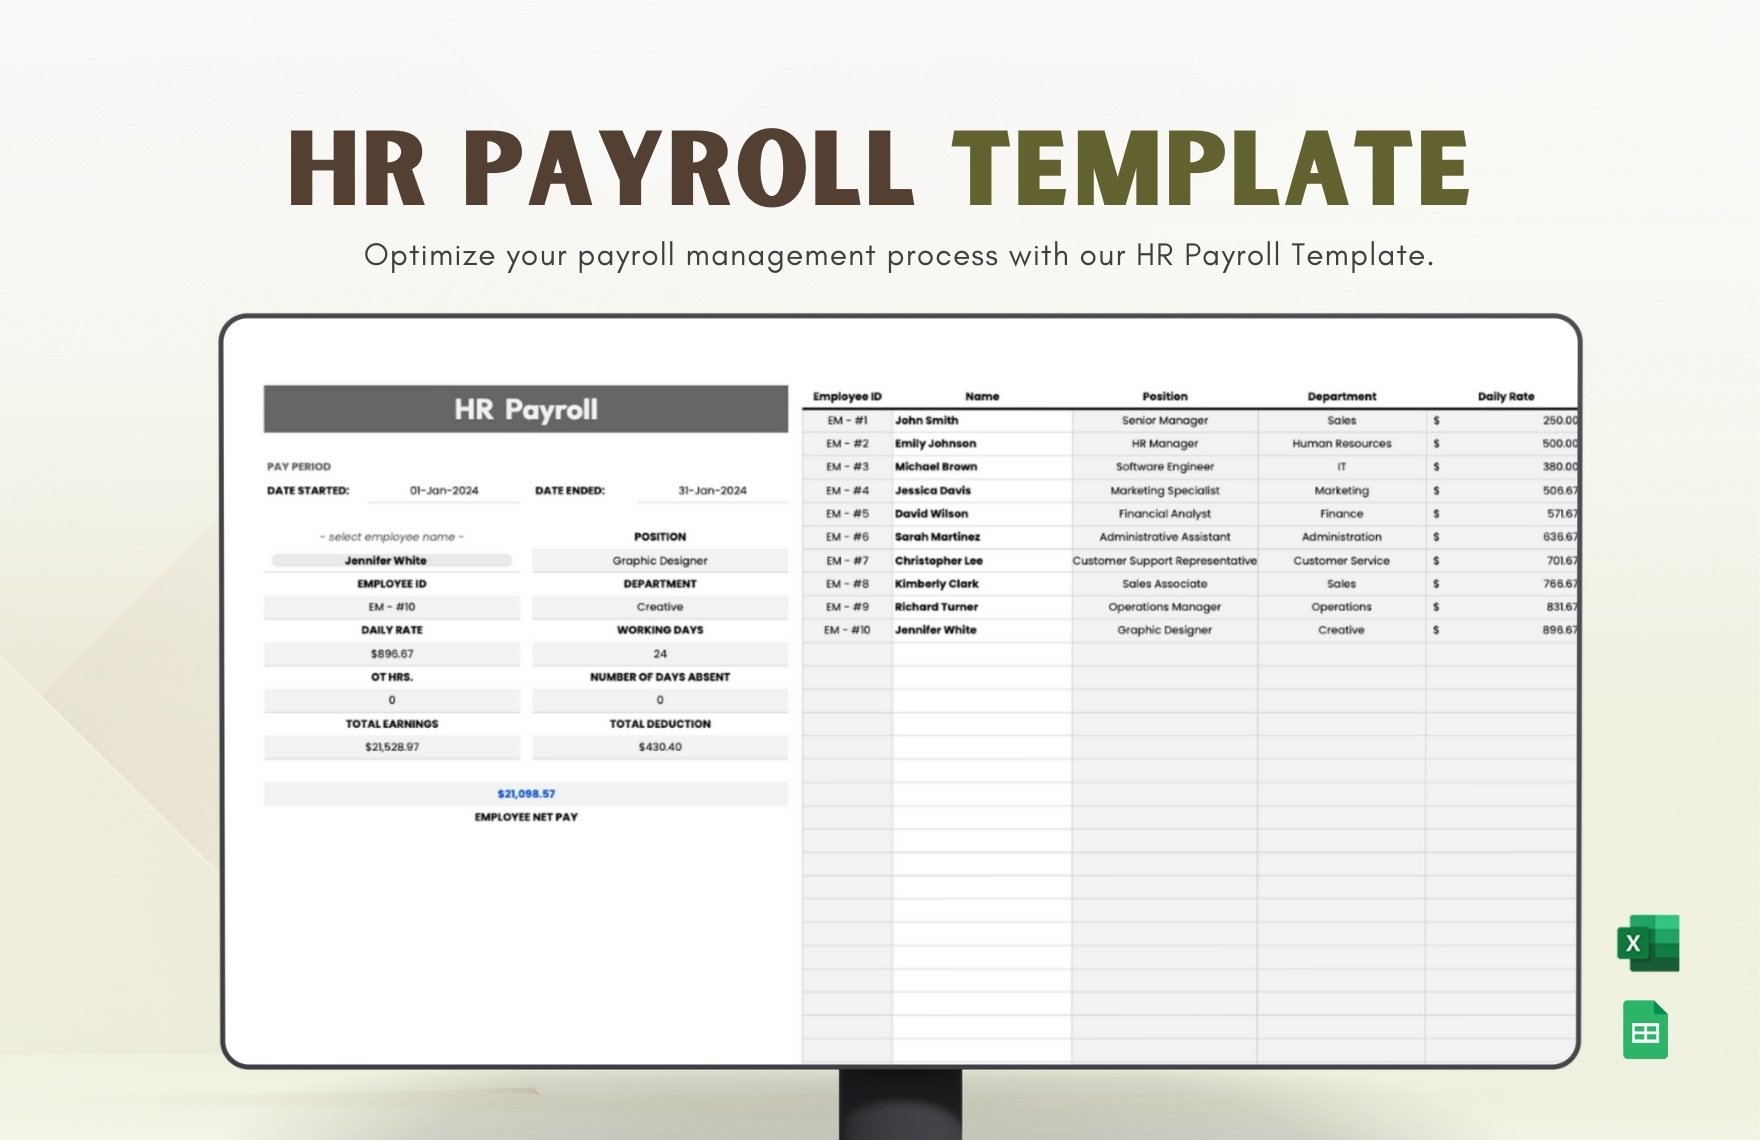 HR Payroll Template in Excel, Google Sheets